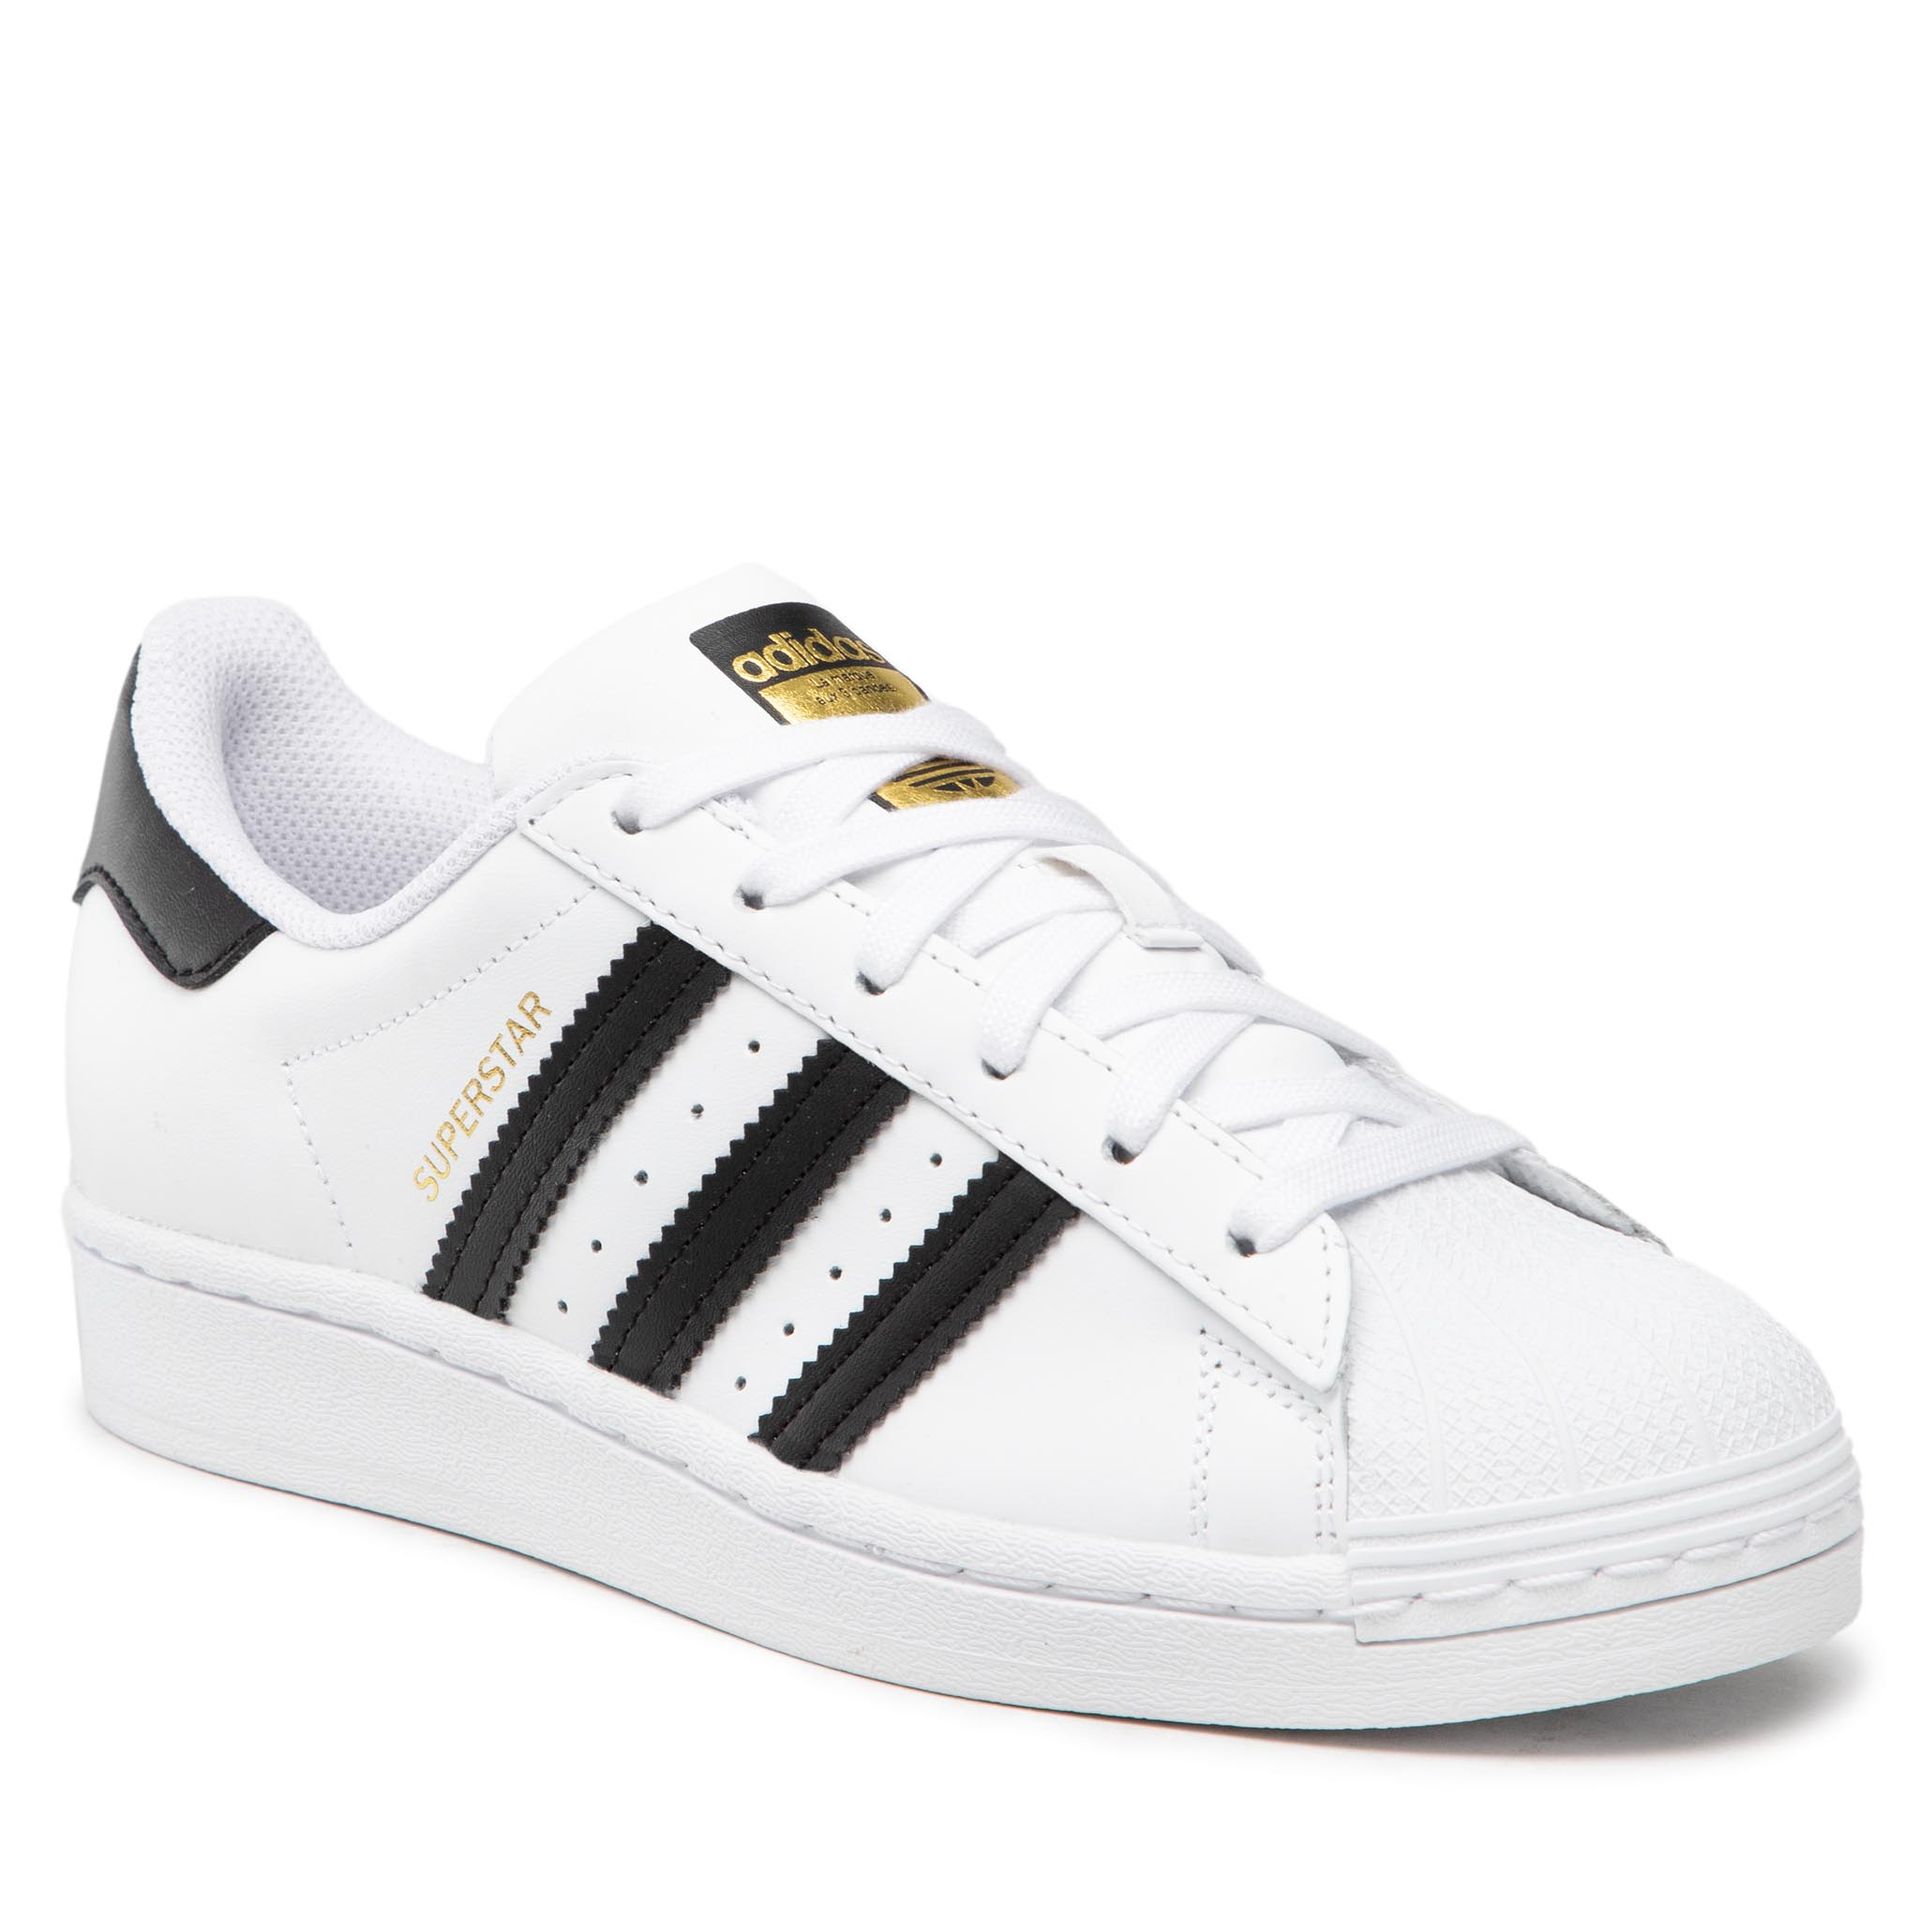 Opinie o Superstar Shoes FU7712